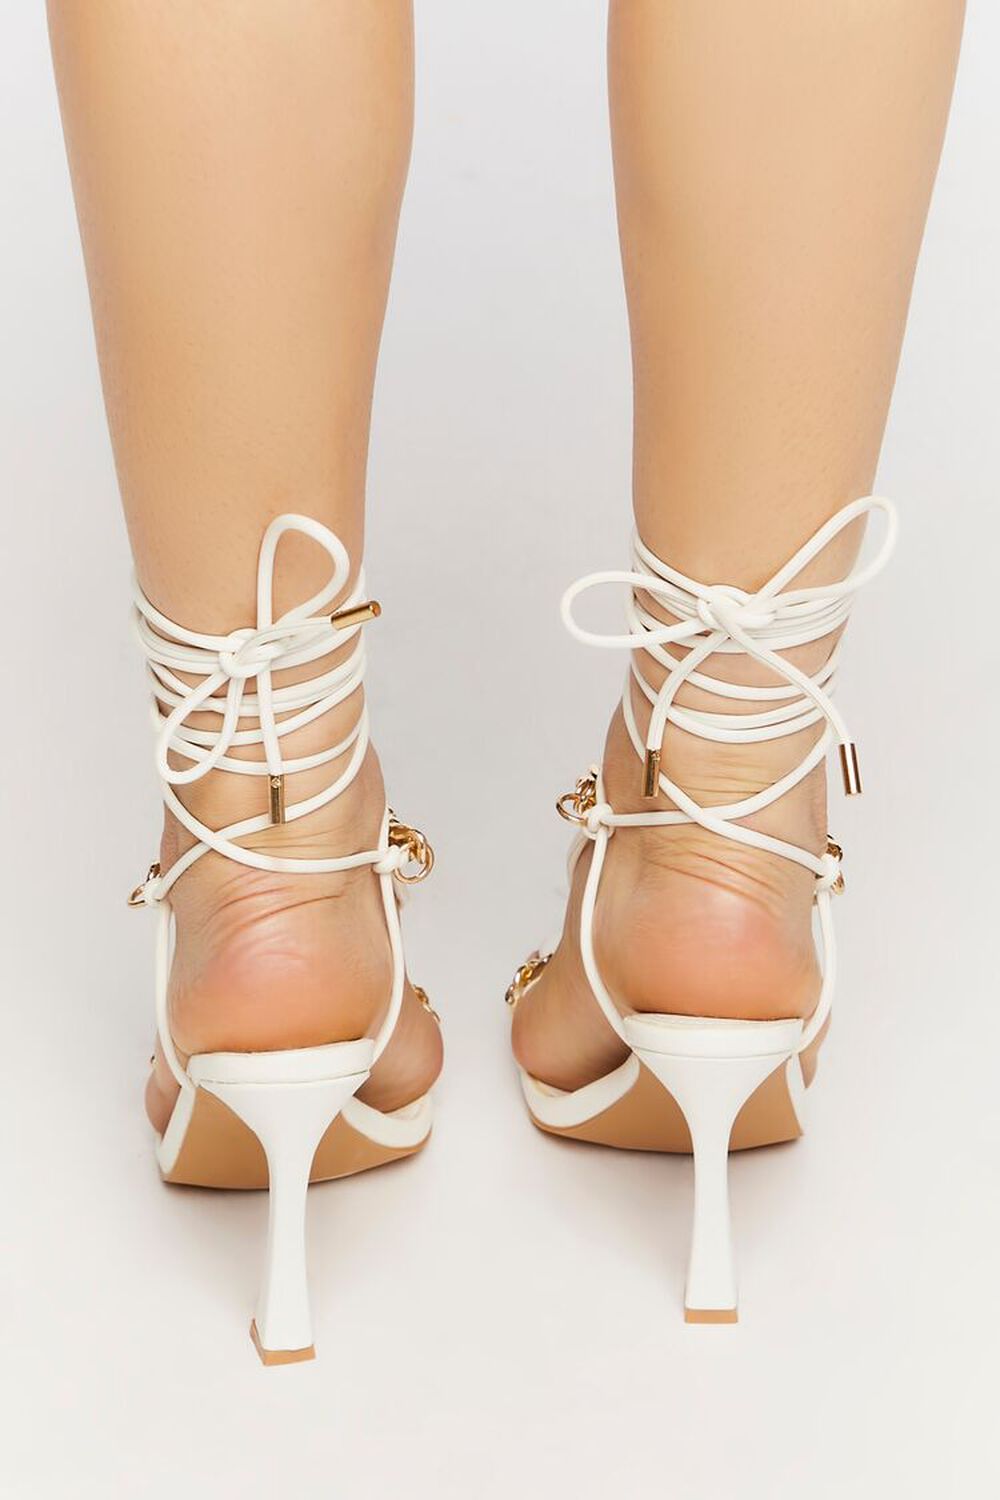 CREAM Faux Leather Strappy Chain Heels, image 3